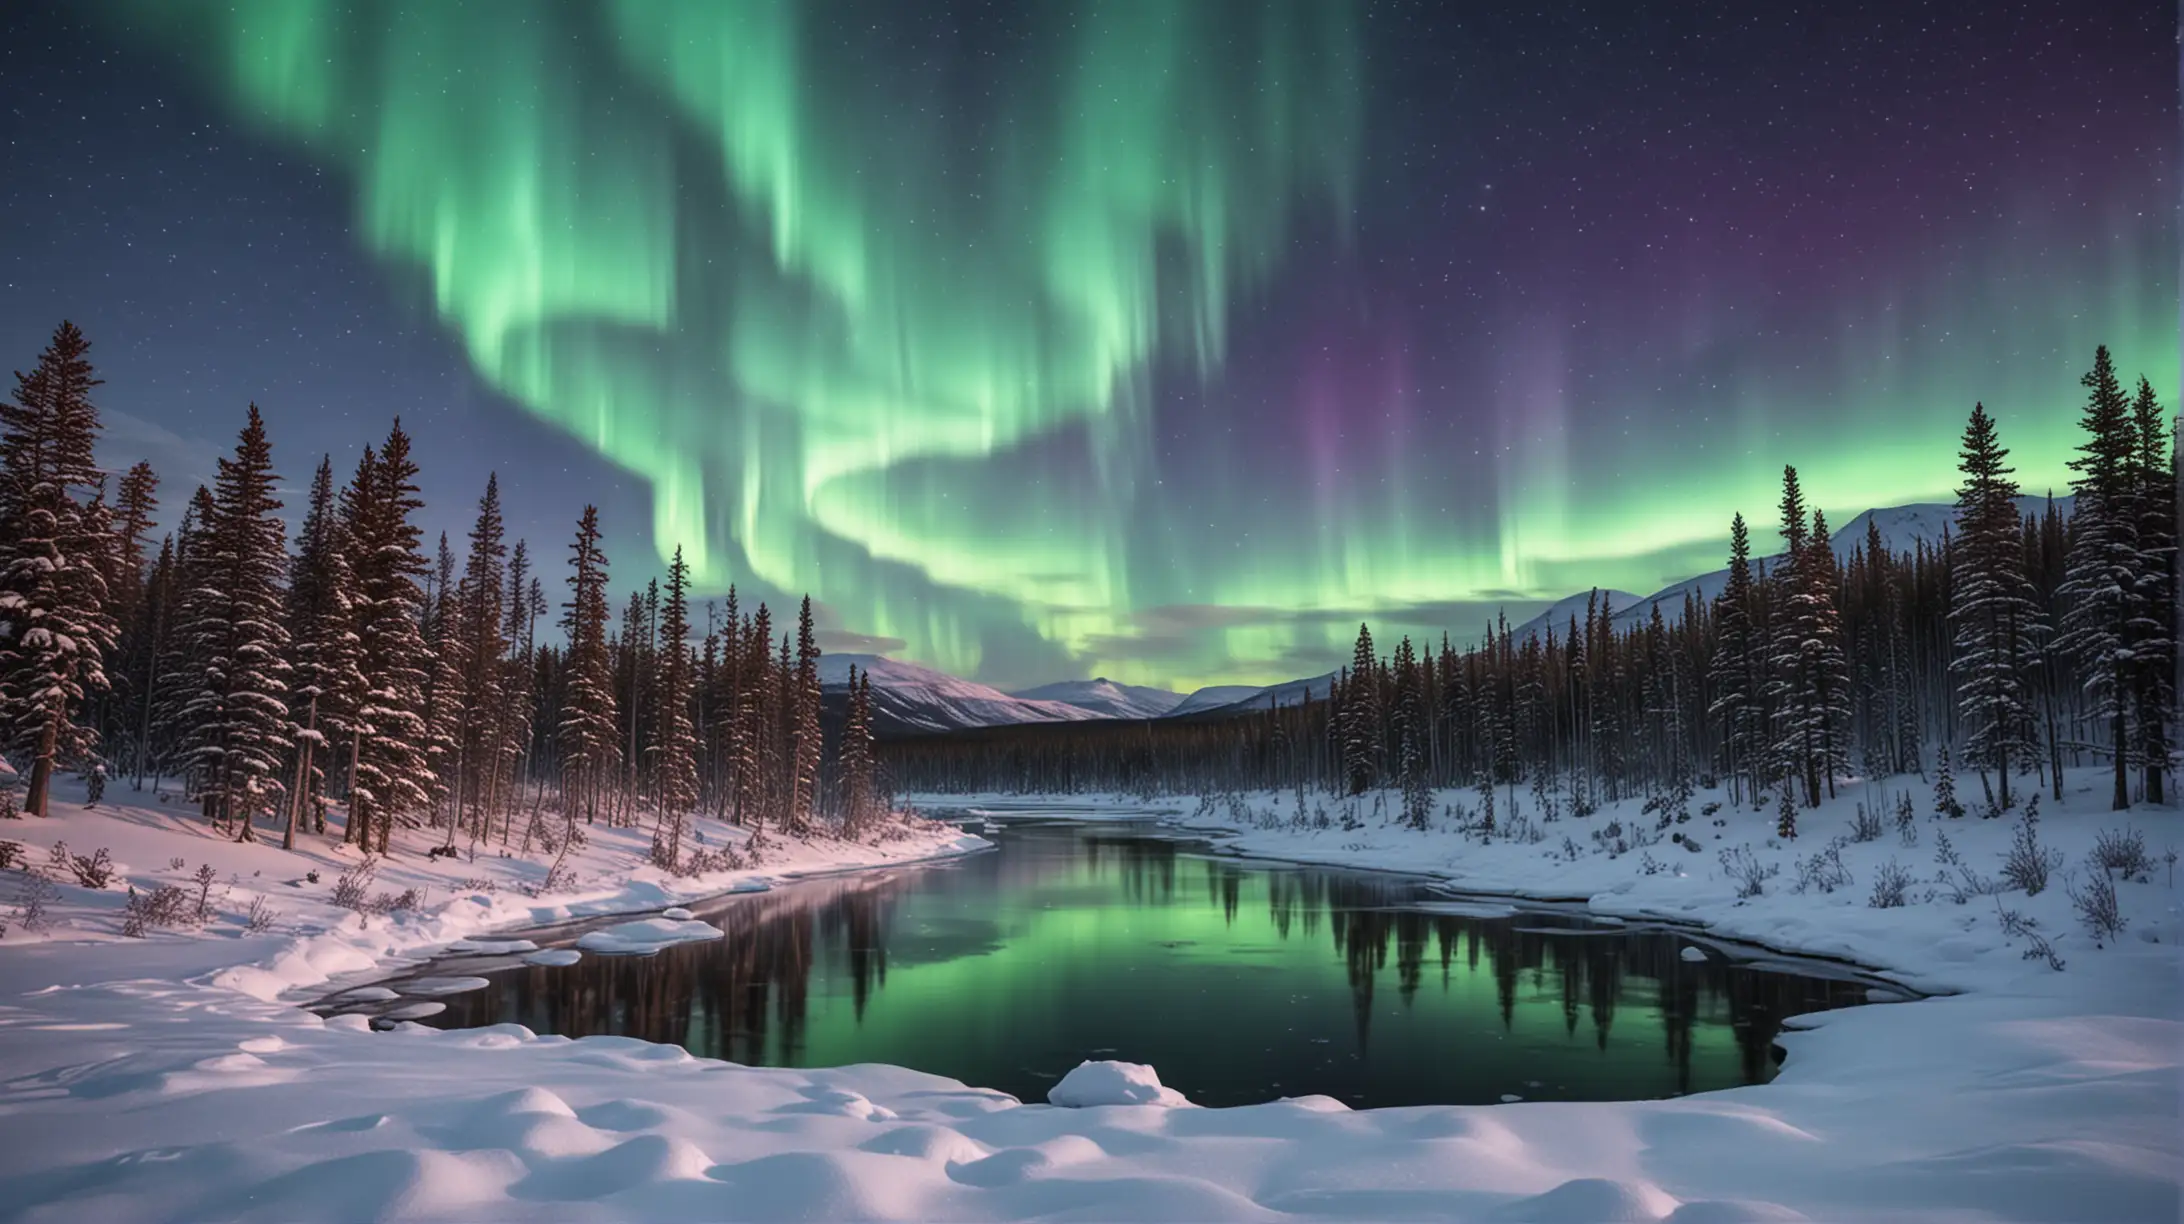 Visualize the Northern Lights dancing across a snow-covered landscape. This scene may include a frozen lake, pine trees weighed down by snow, and the vibrant colors of the northern lights in the night sky.